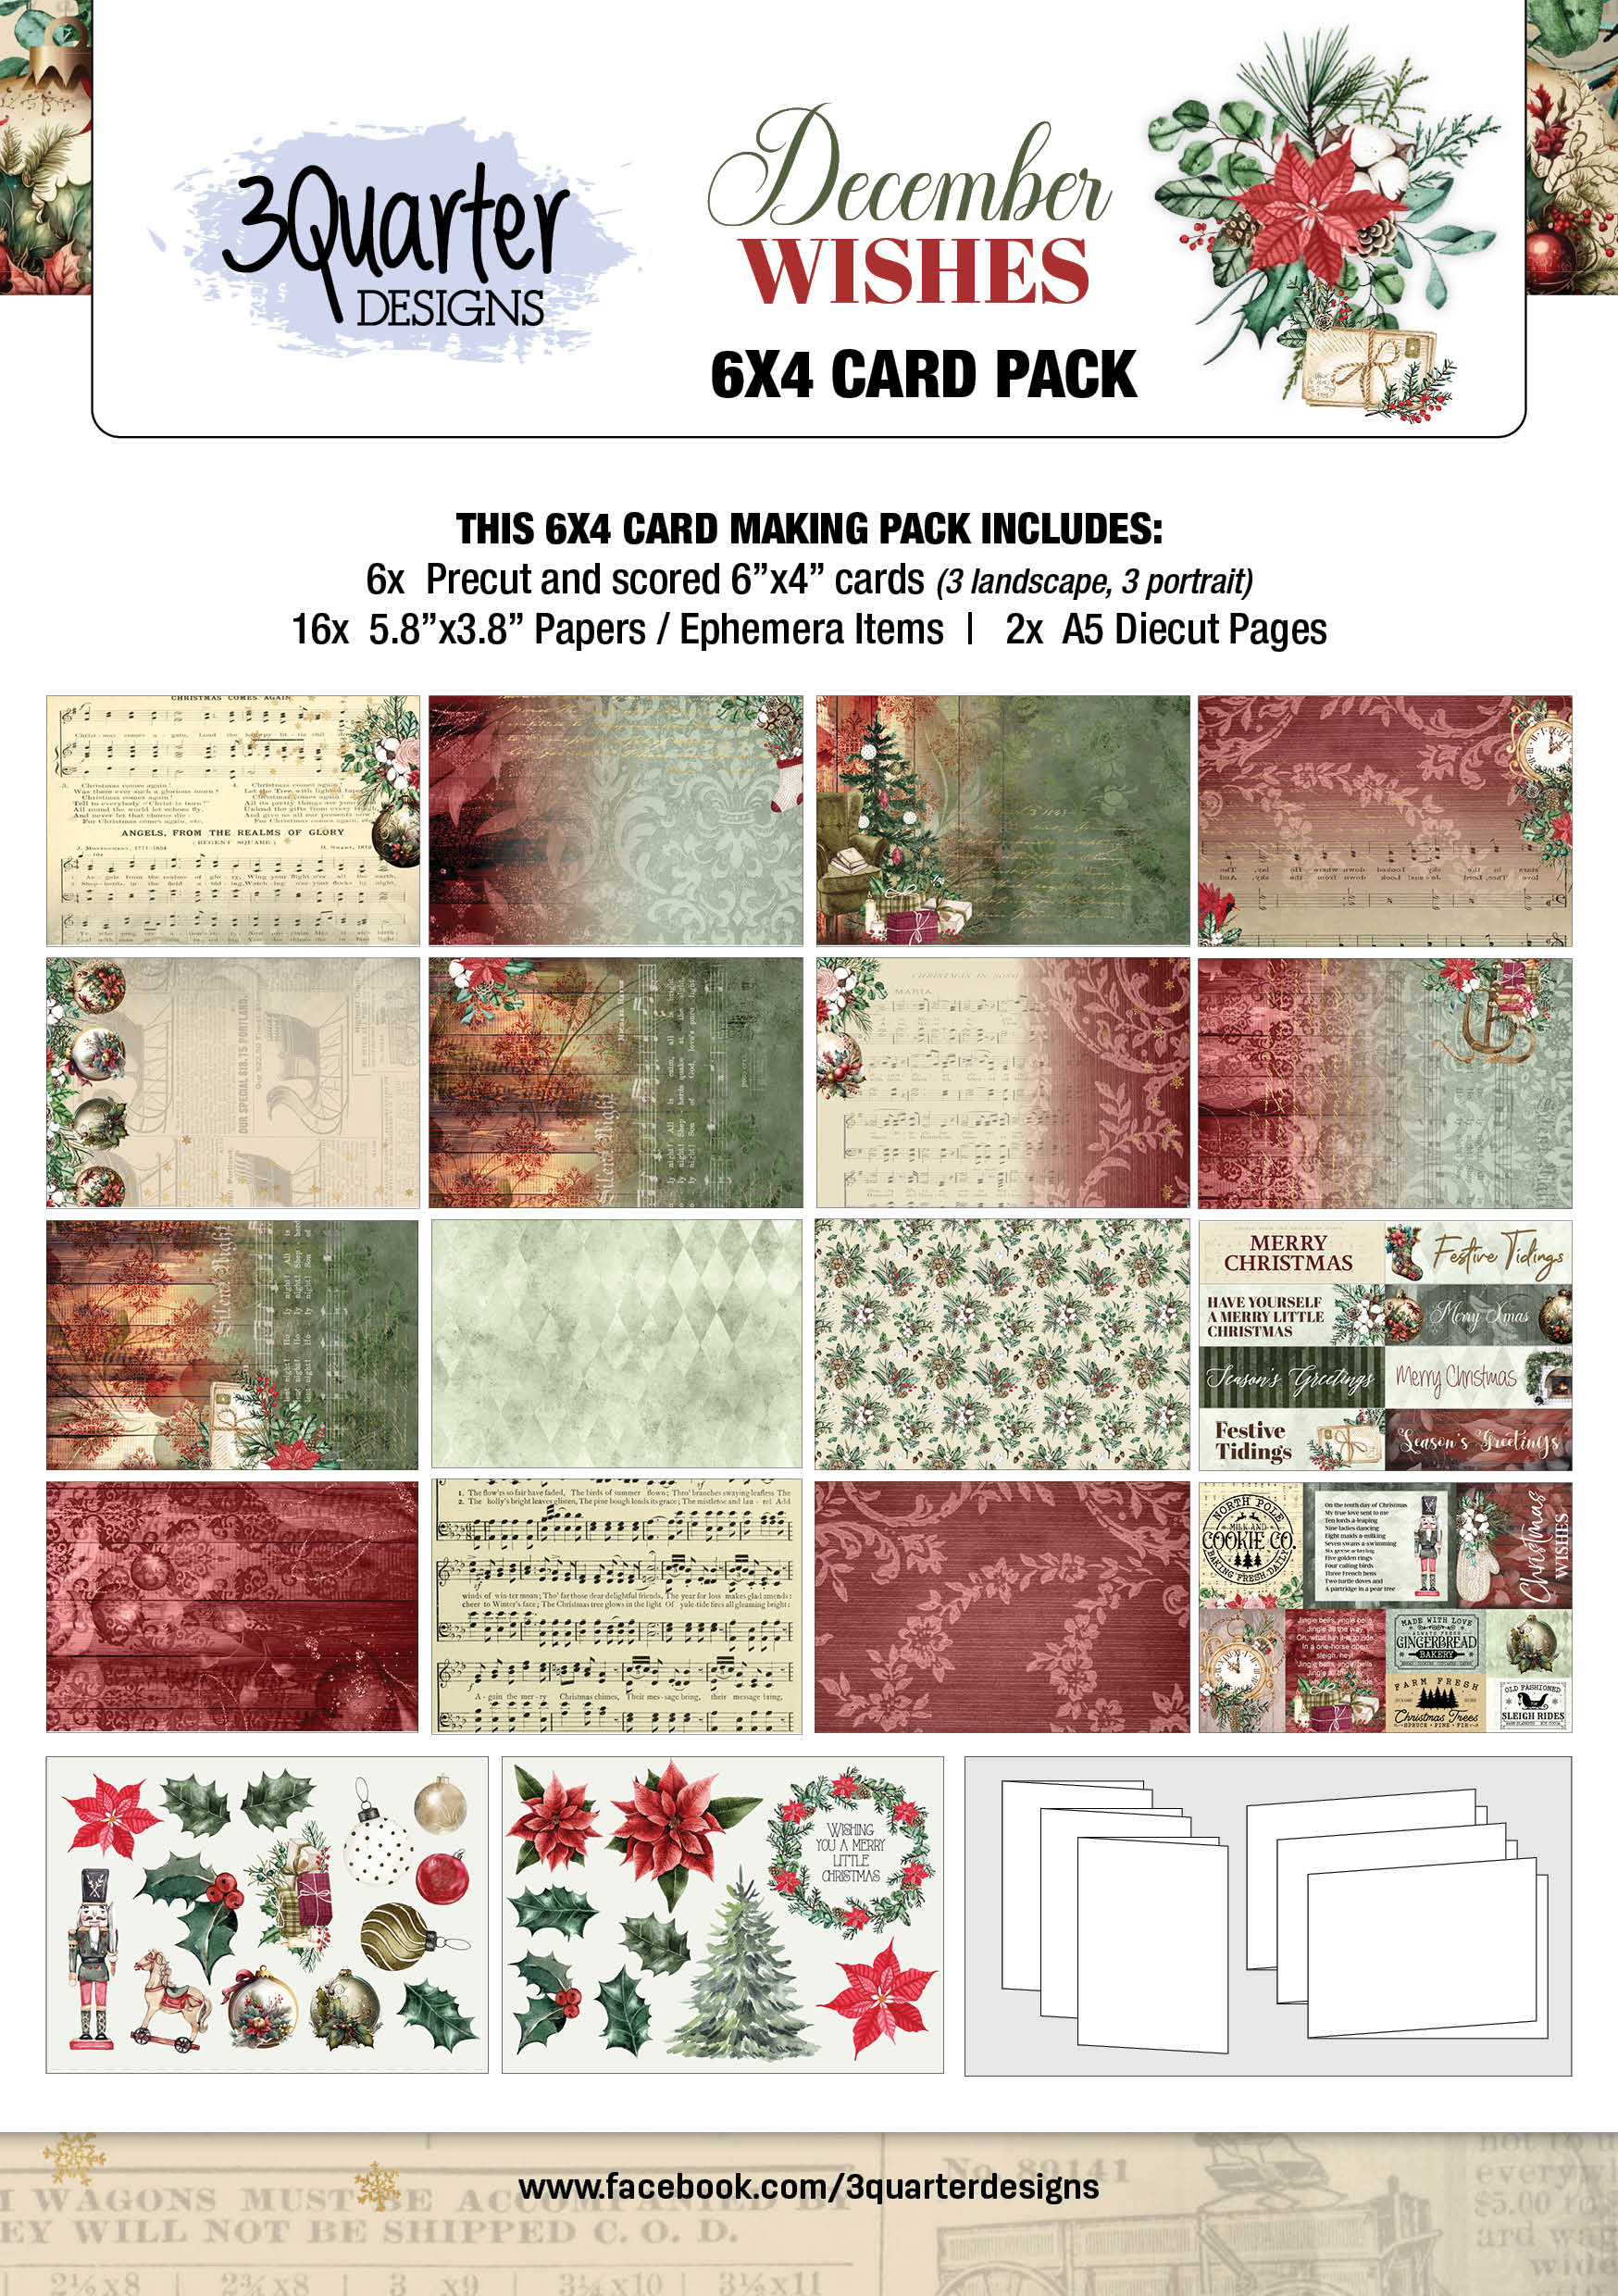 December Wishes 6x4 Card Pack